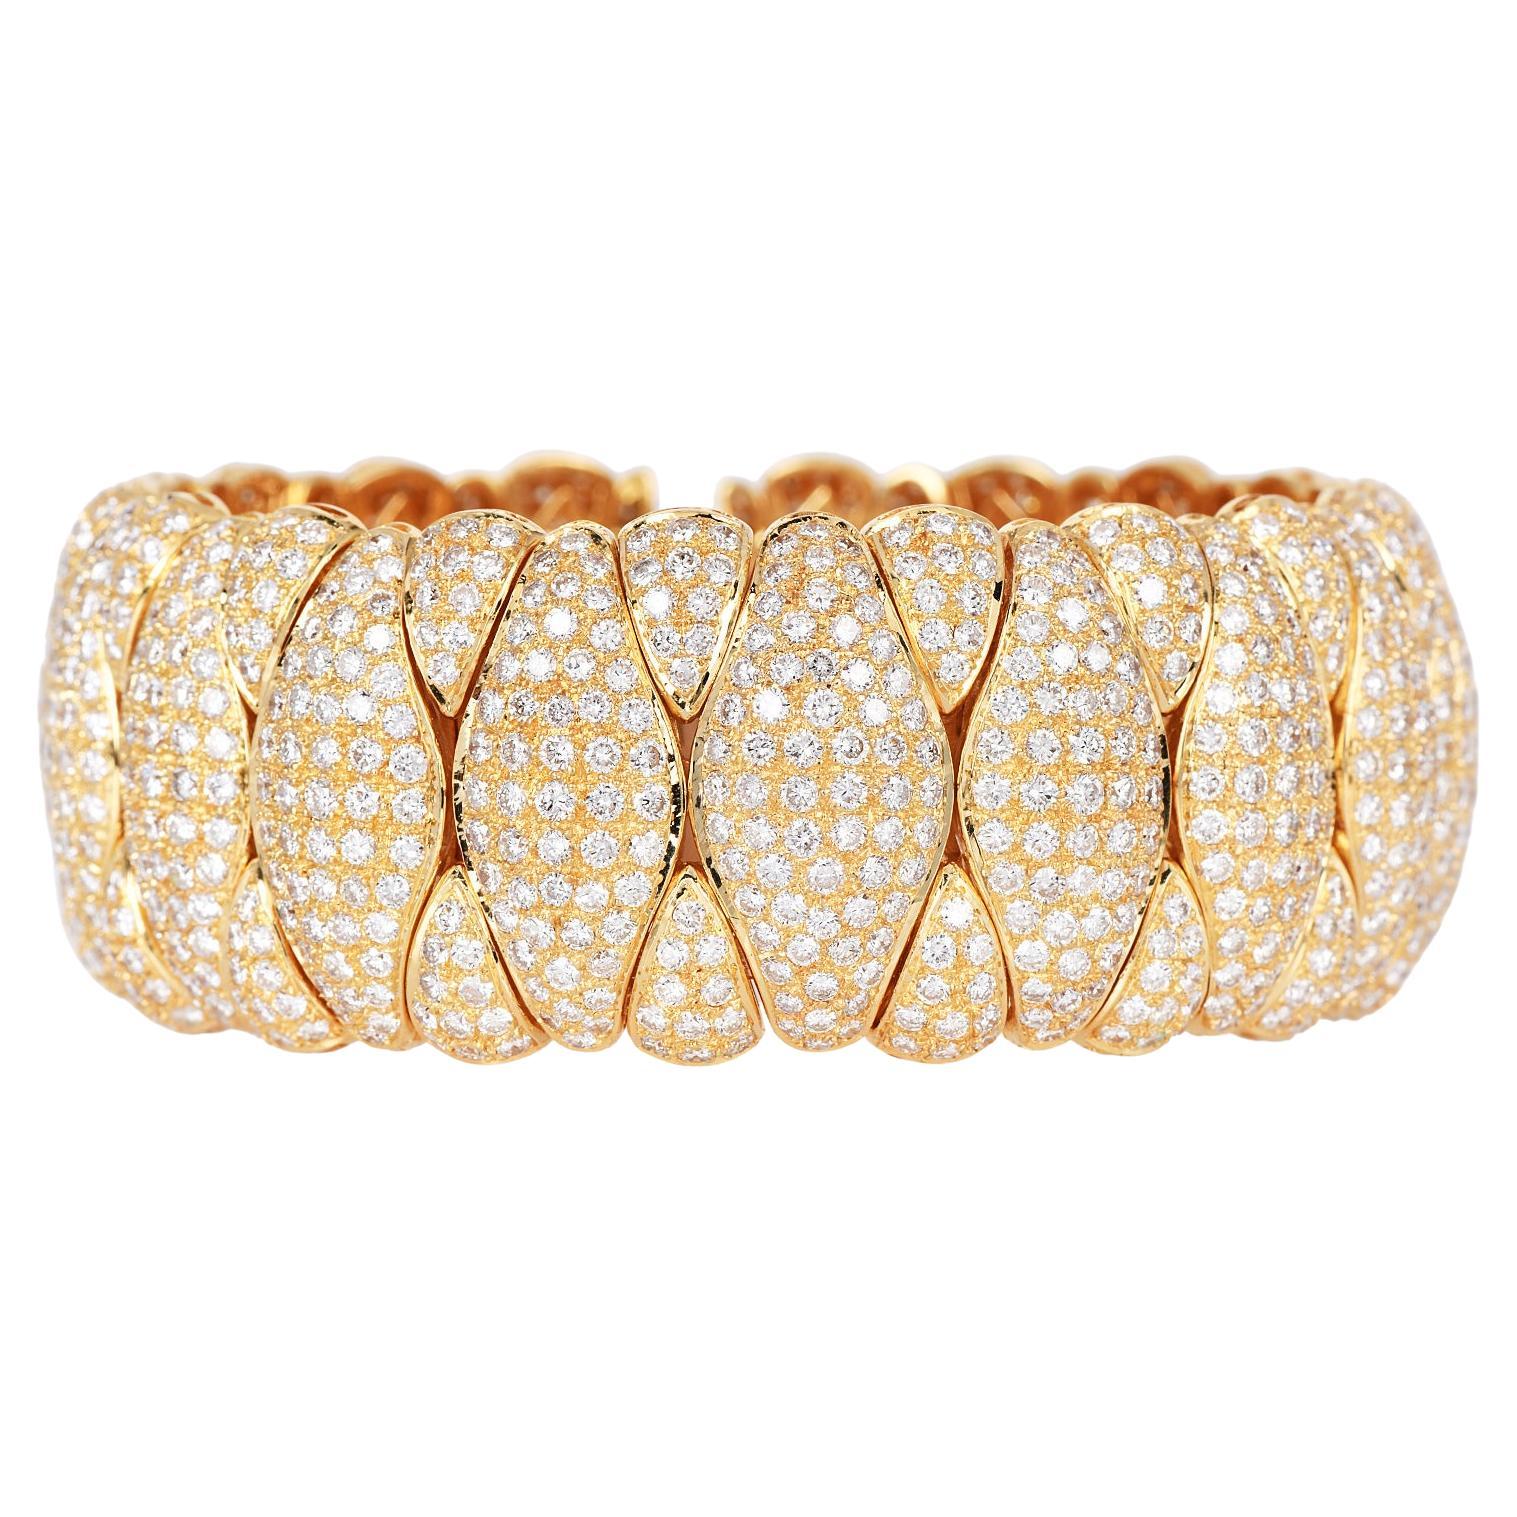 21st Century  Wide 27.0cts Diamond 18K Wide Cuff Bangle  For Sale